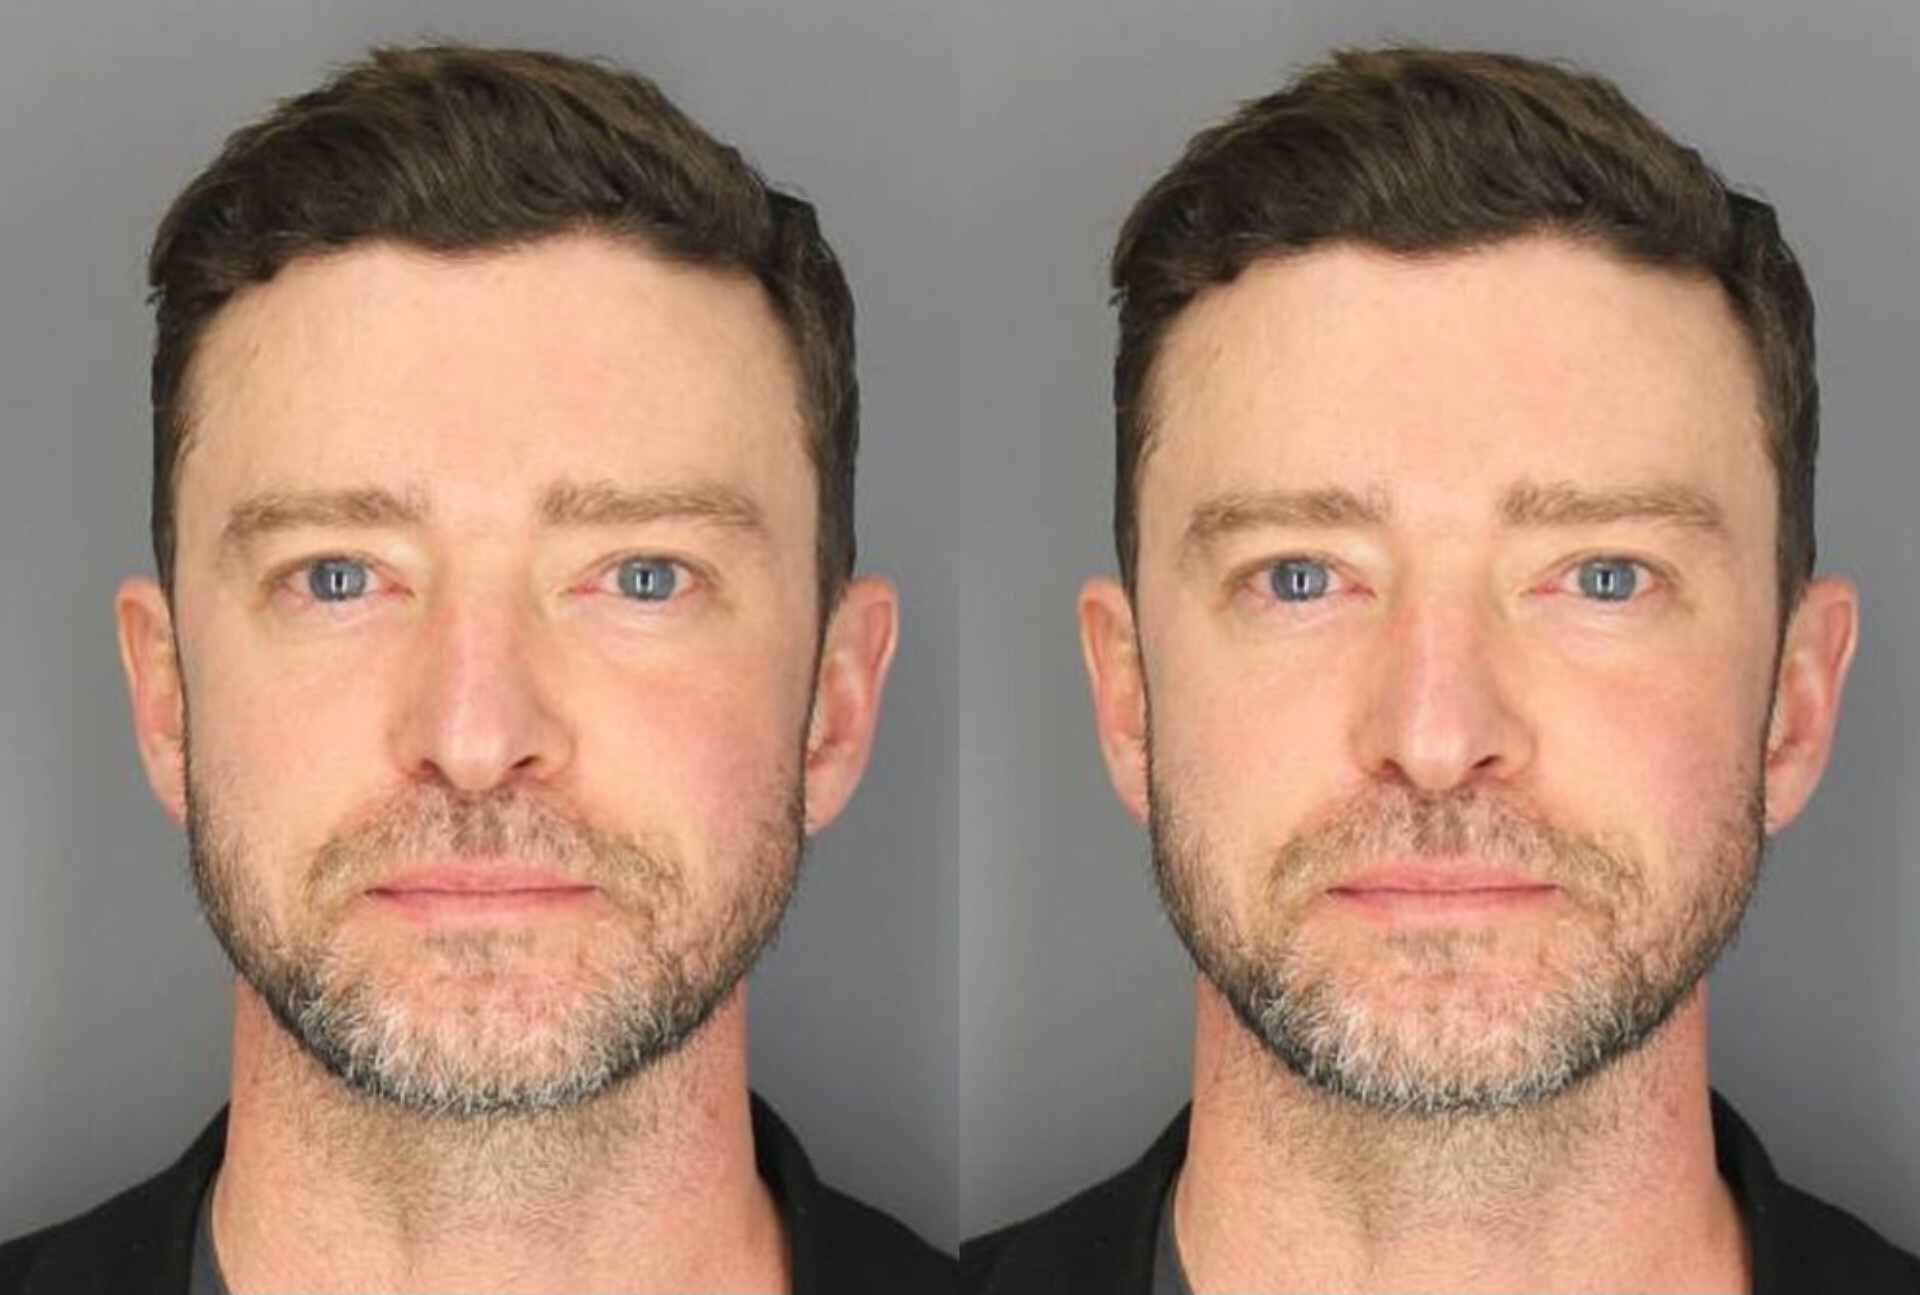 American musician Justin Timberlake's mugshot has surfaced following his DWI arrest in Sag Harbor for driving under the influence